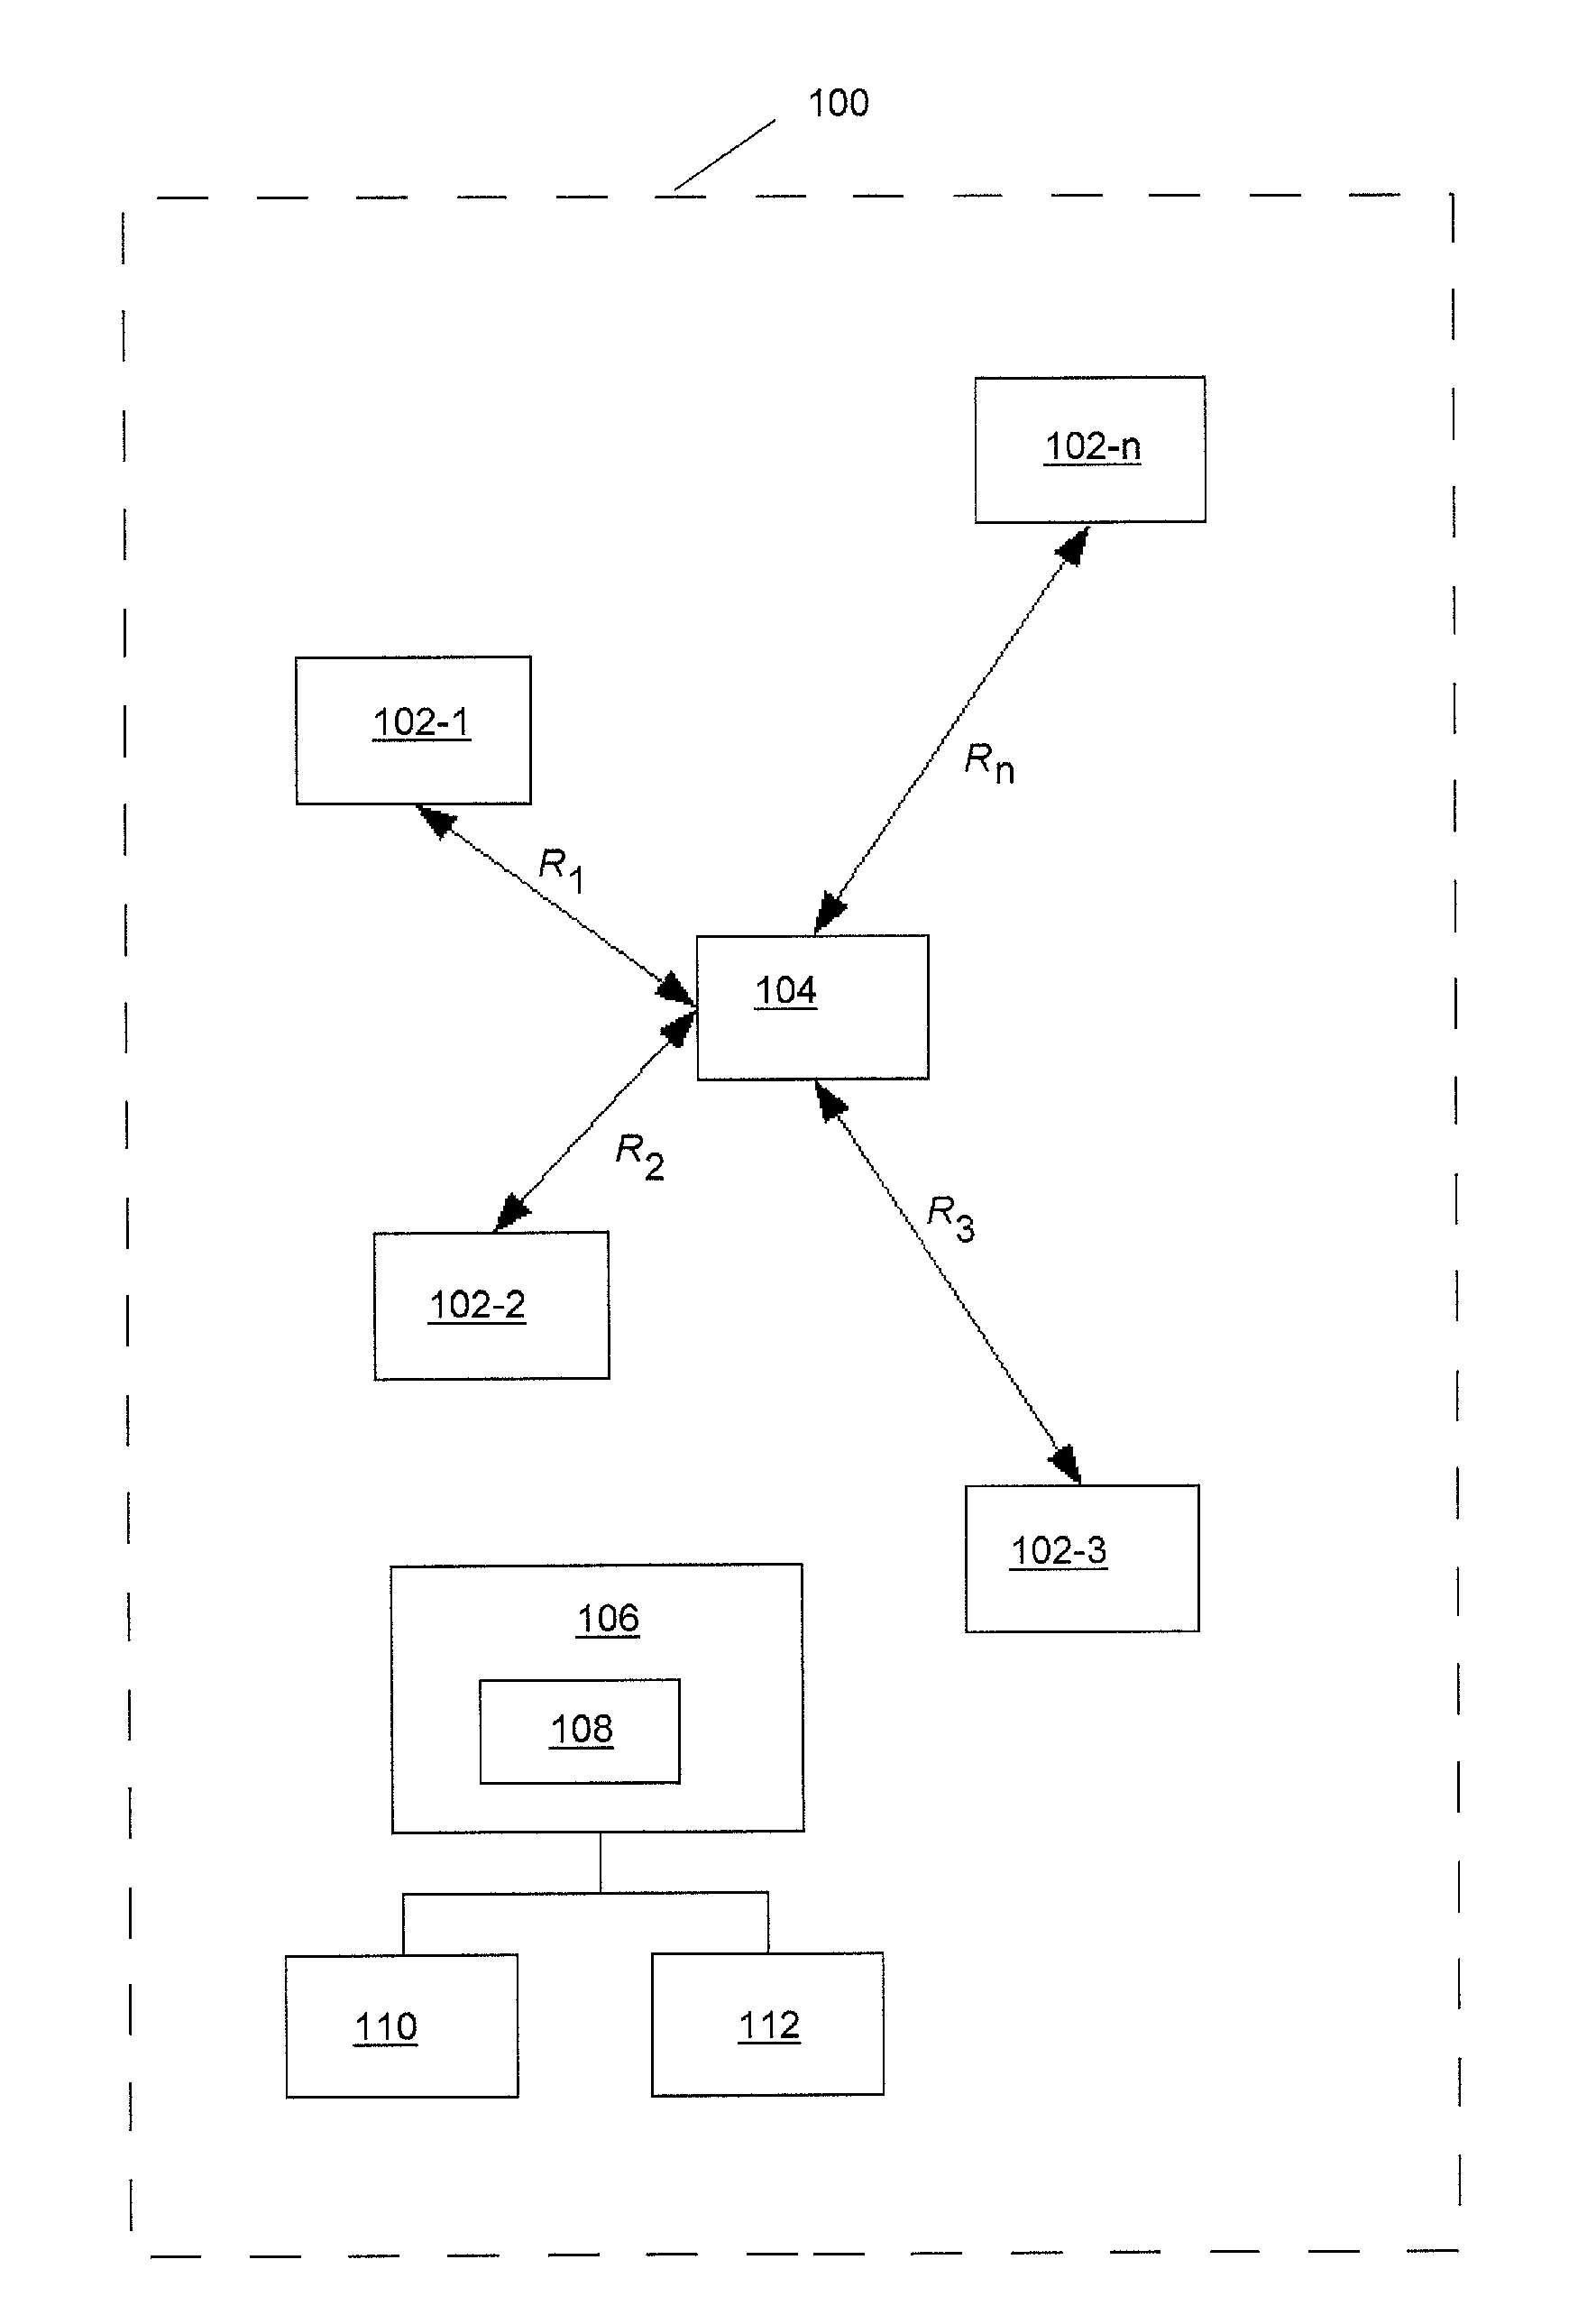 System and method for probablistic WLAN positioning